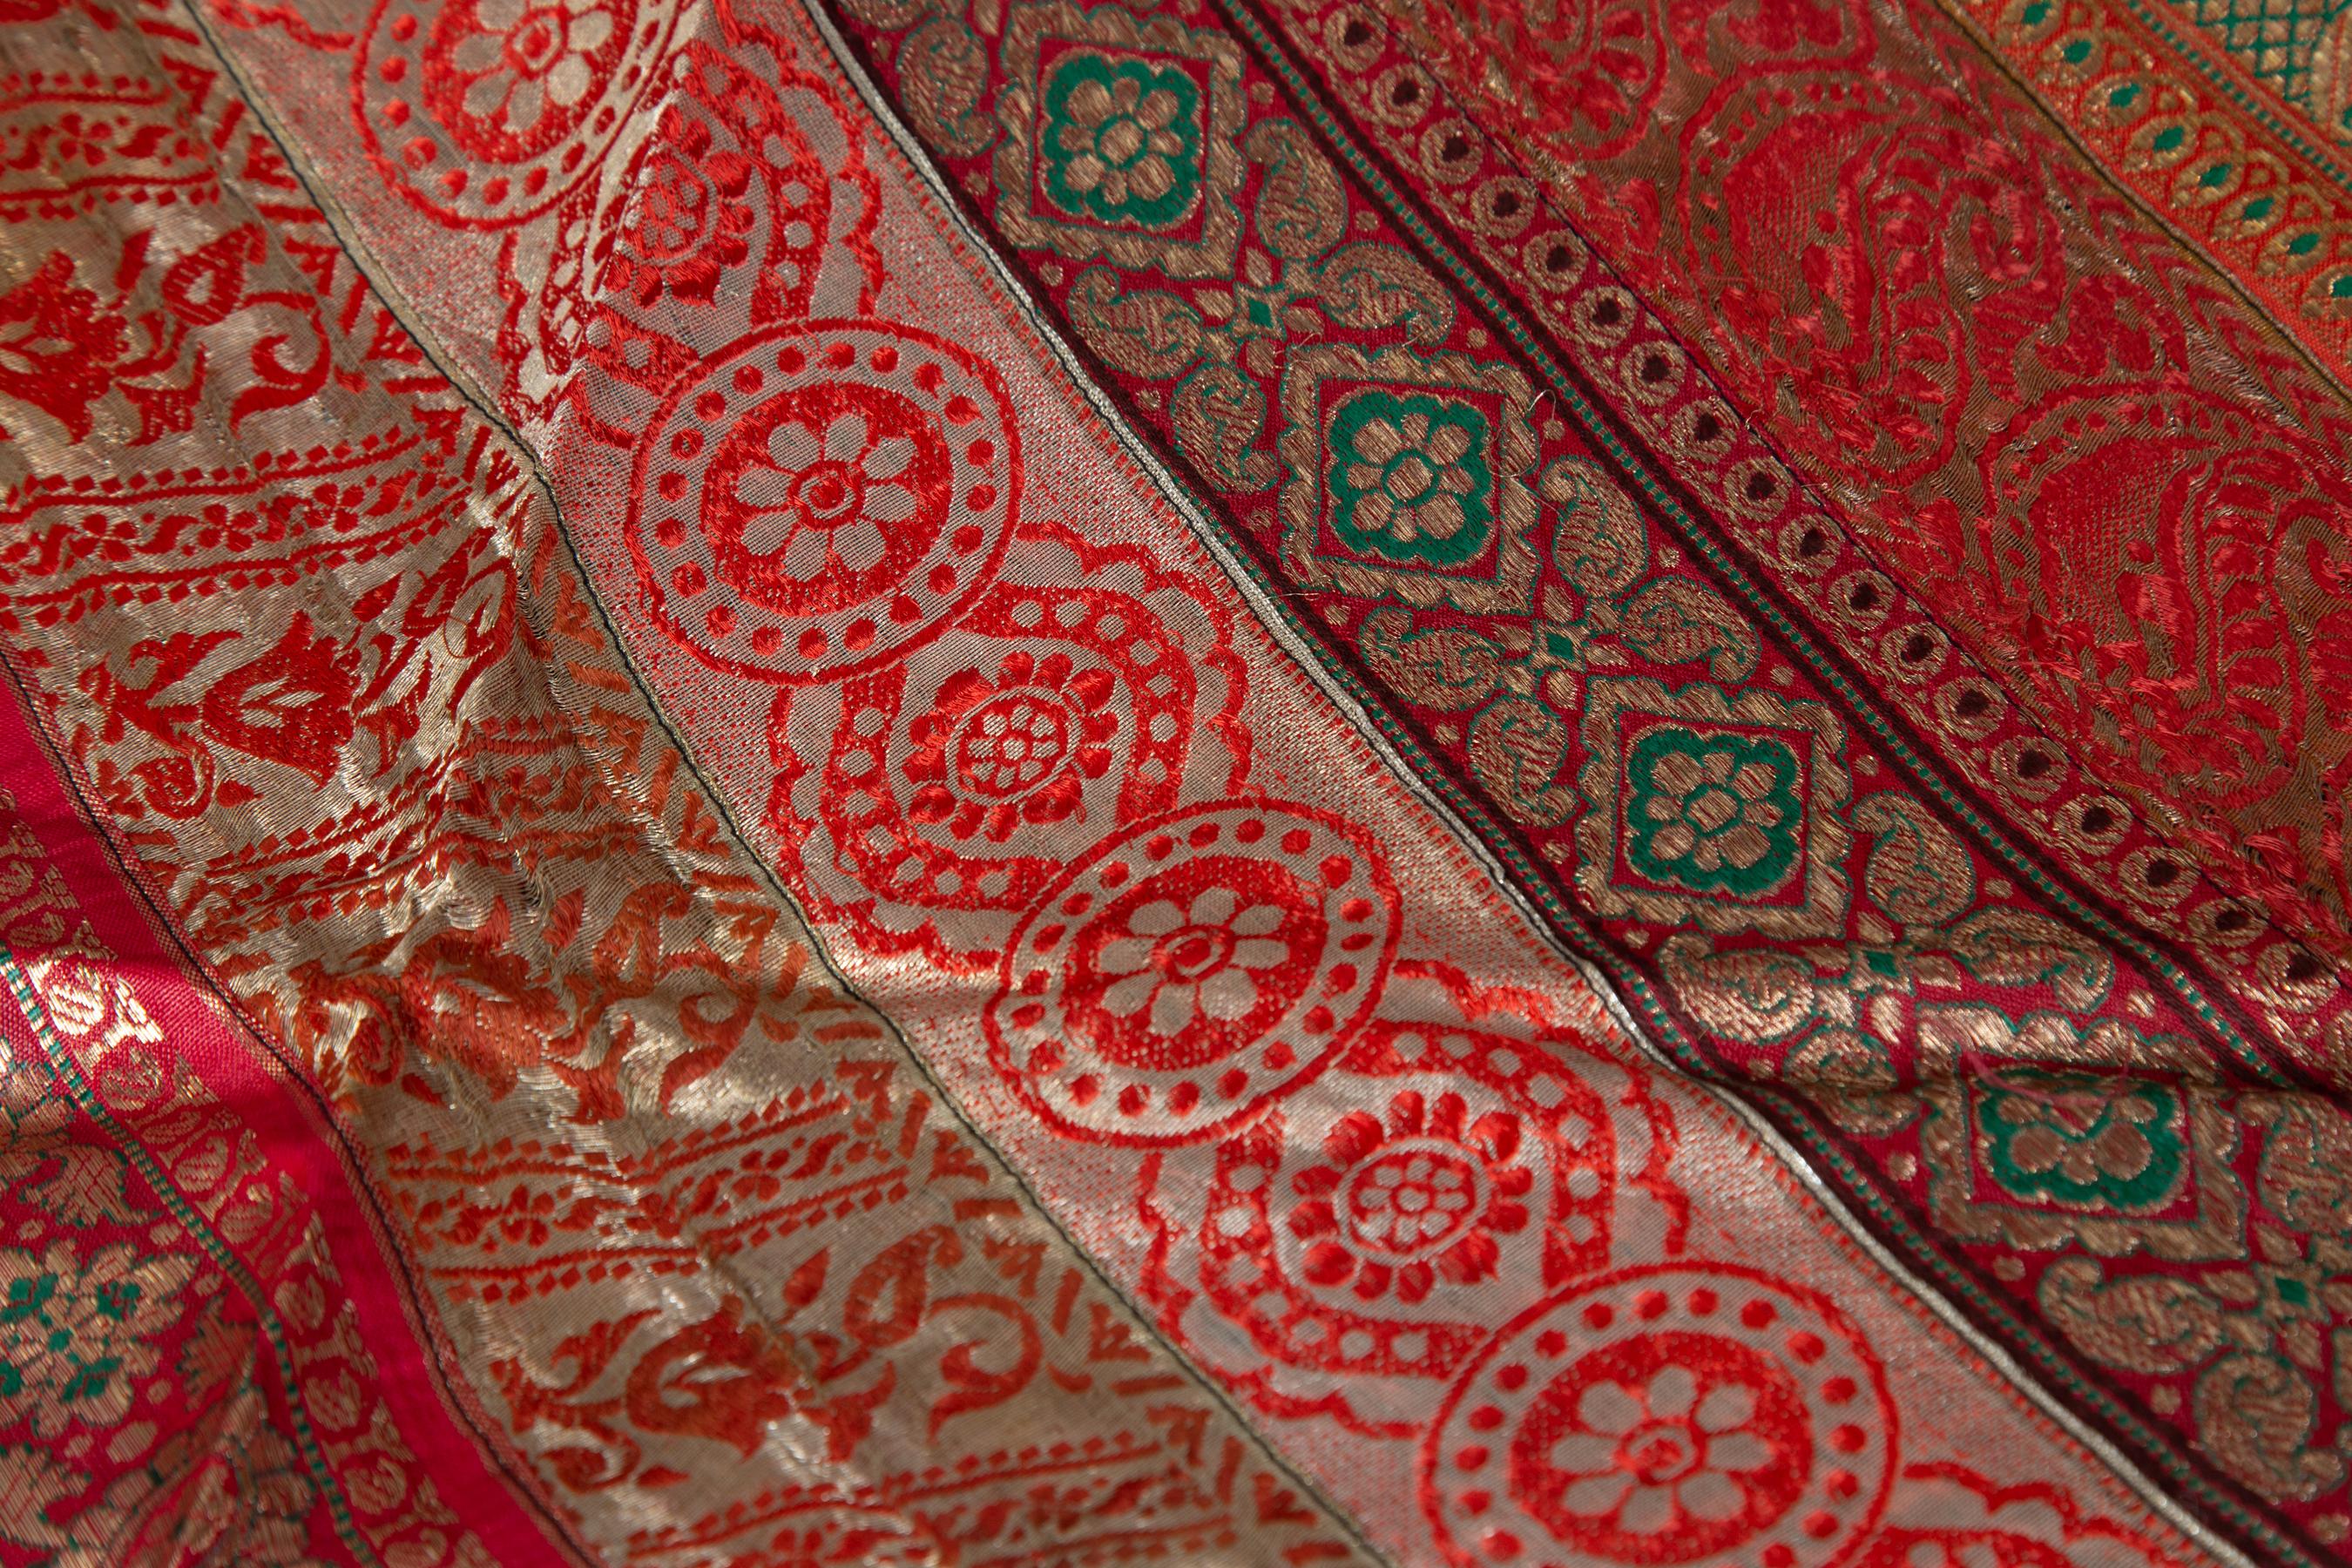 Vintage Indian Silk Embroidered Fabric with Red, Orange, Purple and Golden Tones For Sale 3